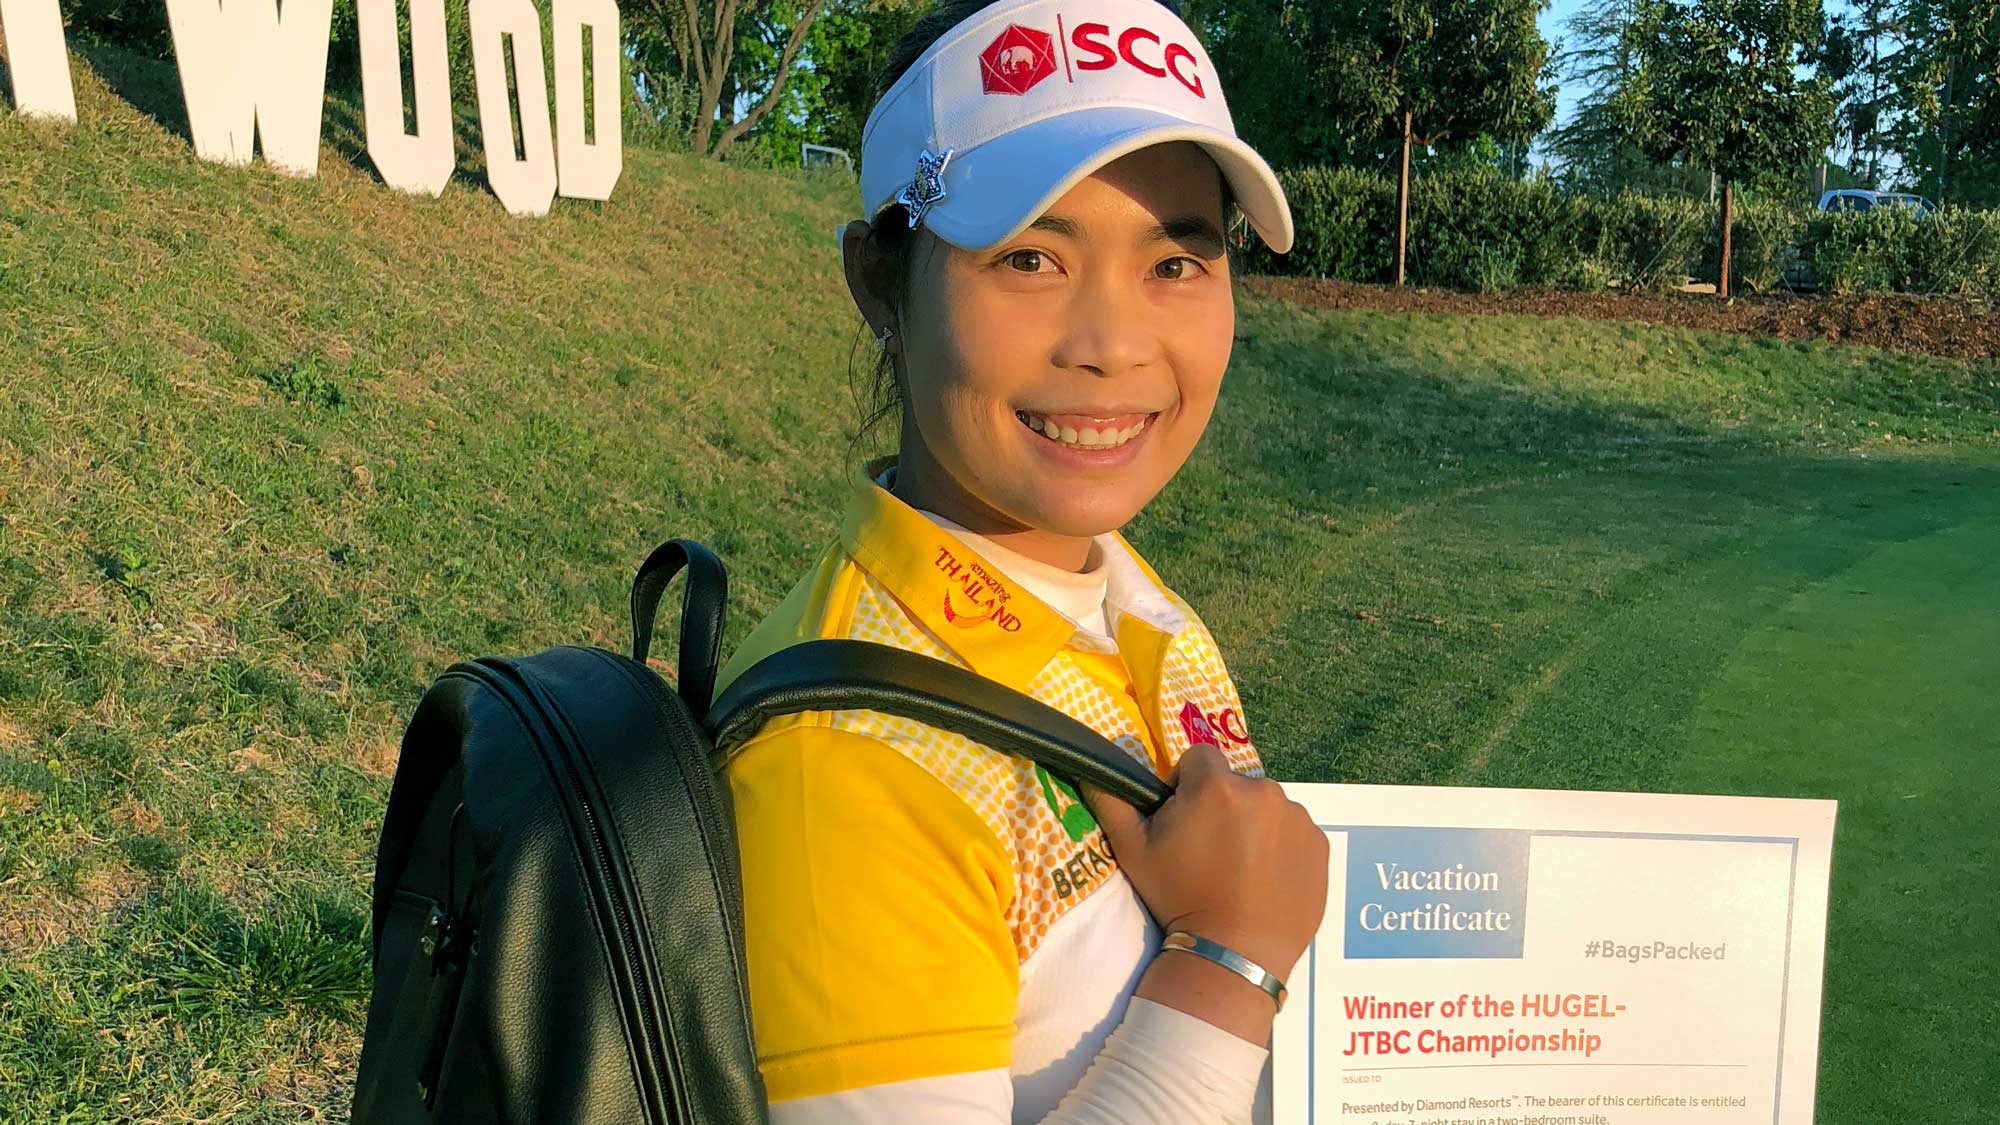 Moriya Jutanugarn has her #BagsPacked for the 2019 Diamond Resorts Tournament of Champions after her victory at the HUGEL-JTBC LA Open